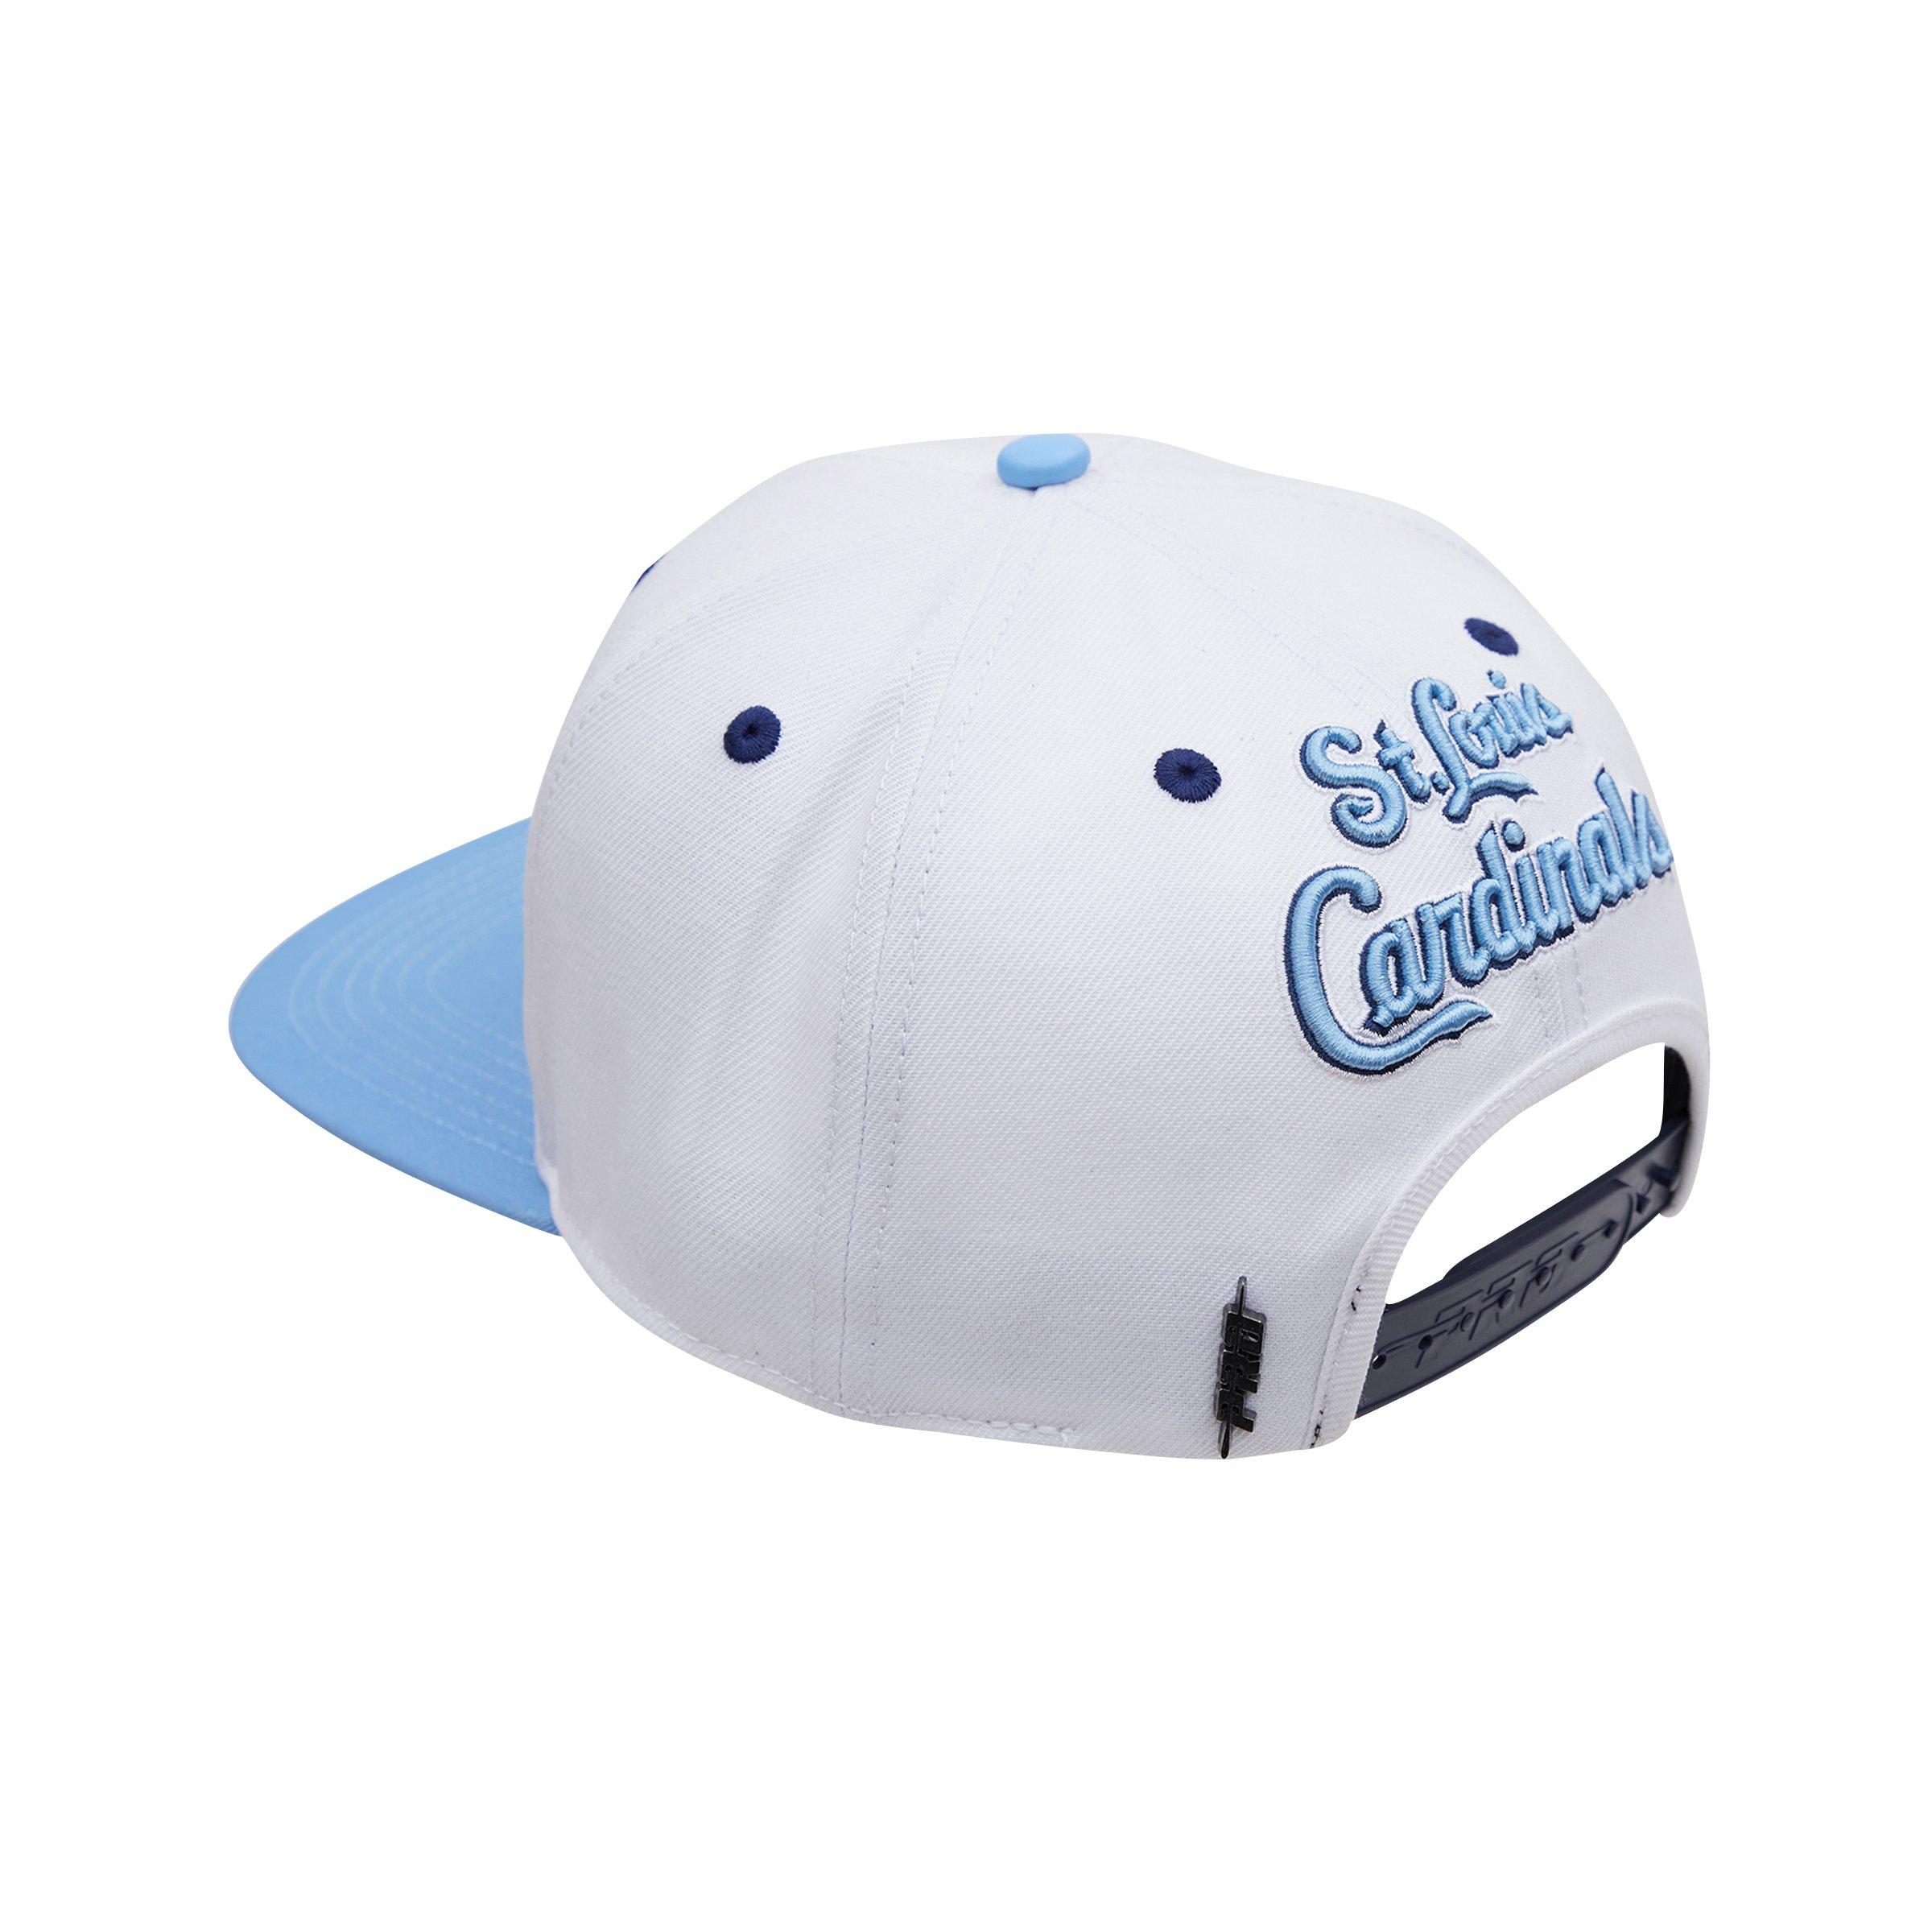 St. Louis Cardinals Nike Cooperstown Collection Pro Snapback Hat - Light  Blue